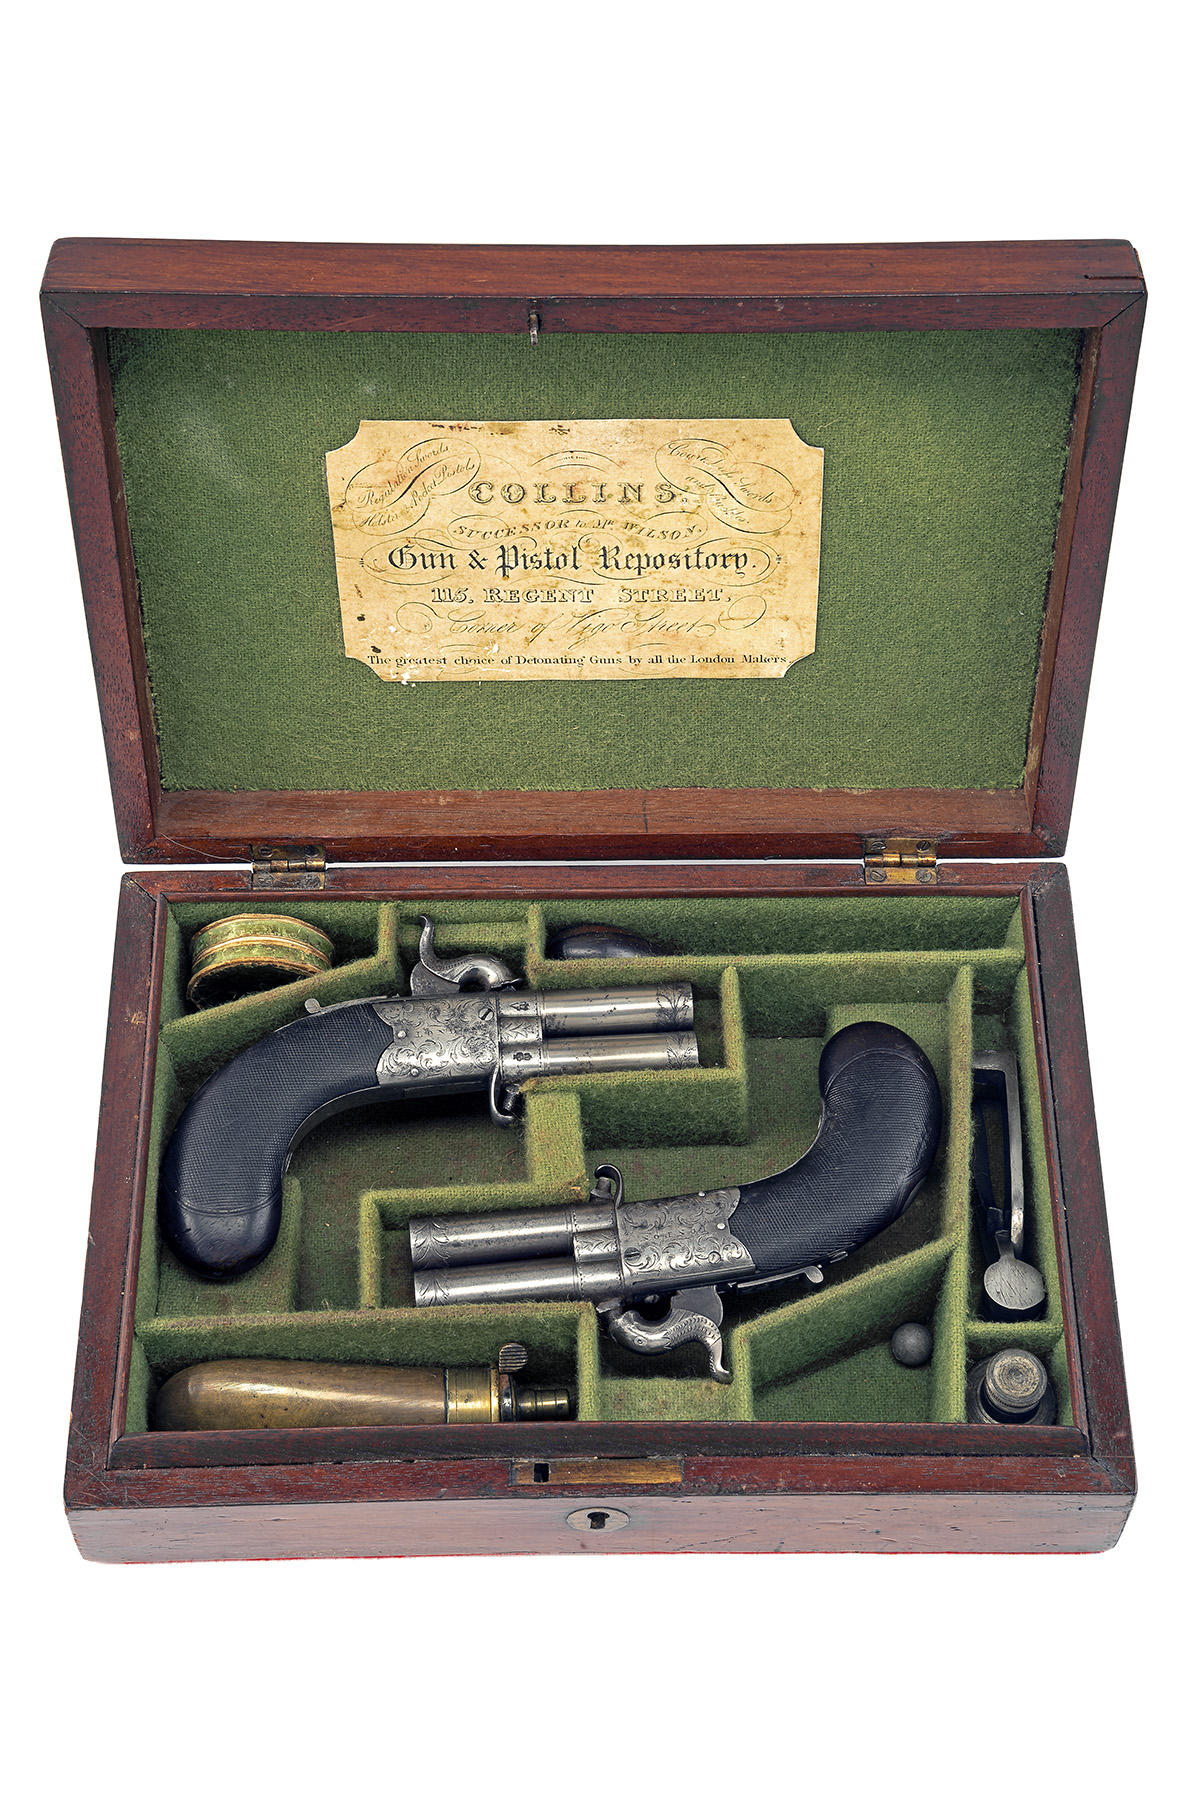 A CASED PAIR OF 80-BORE PERCUSSION TURN-OVER POCKET PISTOLS BY COLLINS OF LONDON CIRCA 1840, no